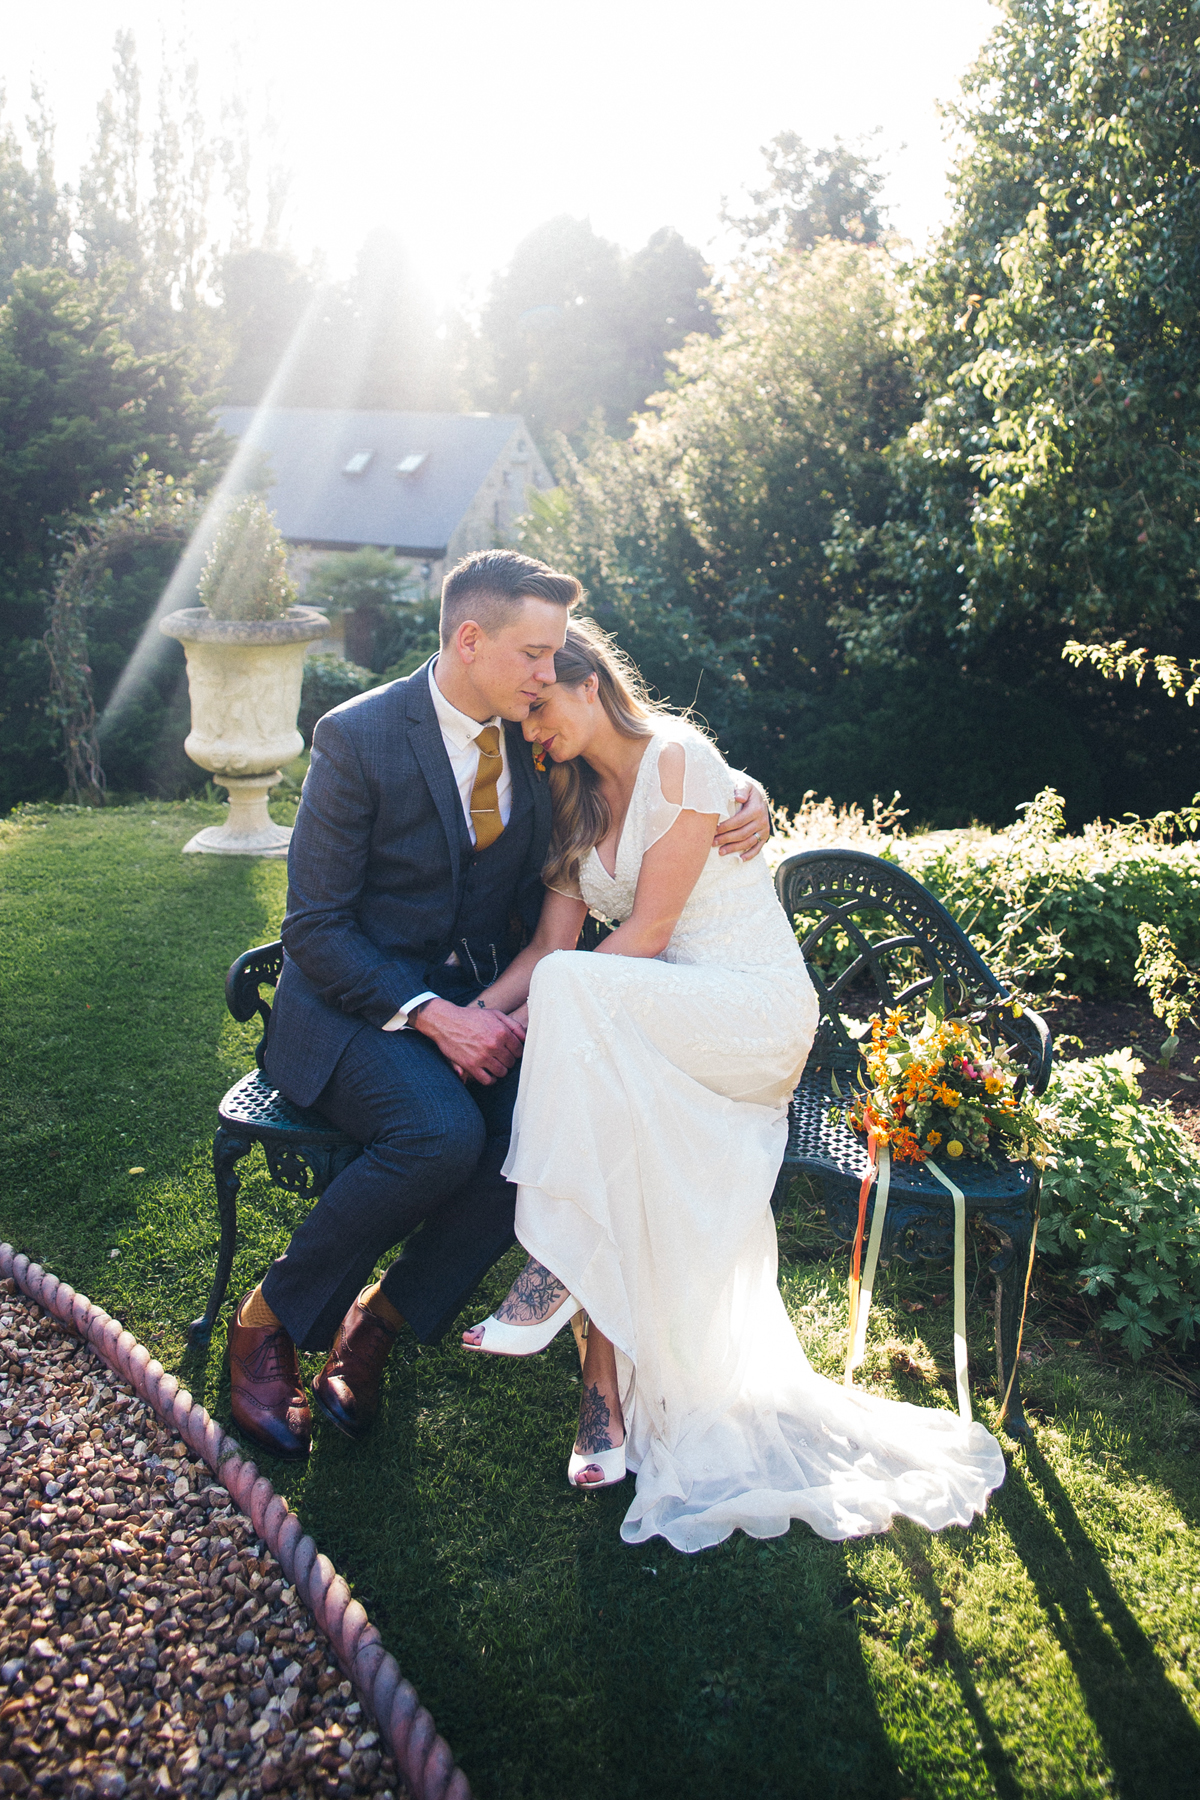 57 Eliza Jane Howell sequin dress for a laidback vintage inspired wedding. Photography by Sally T